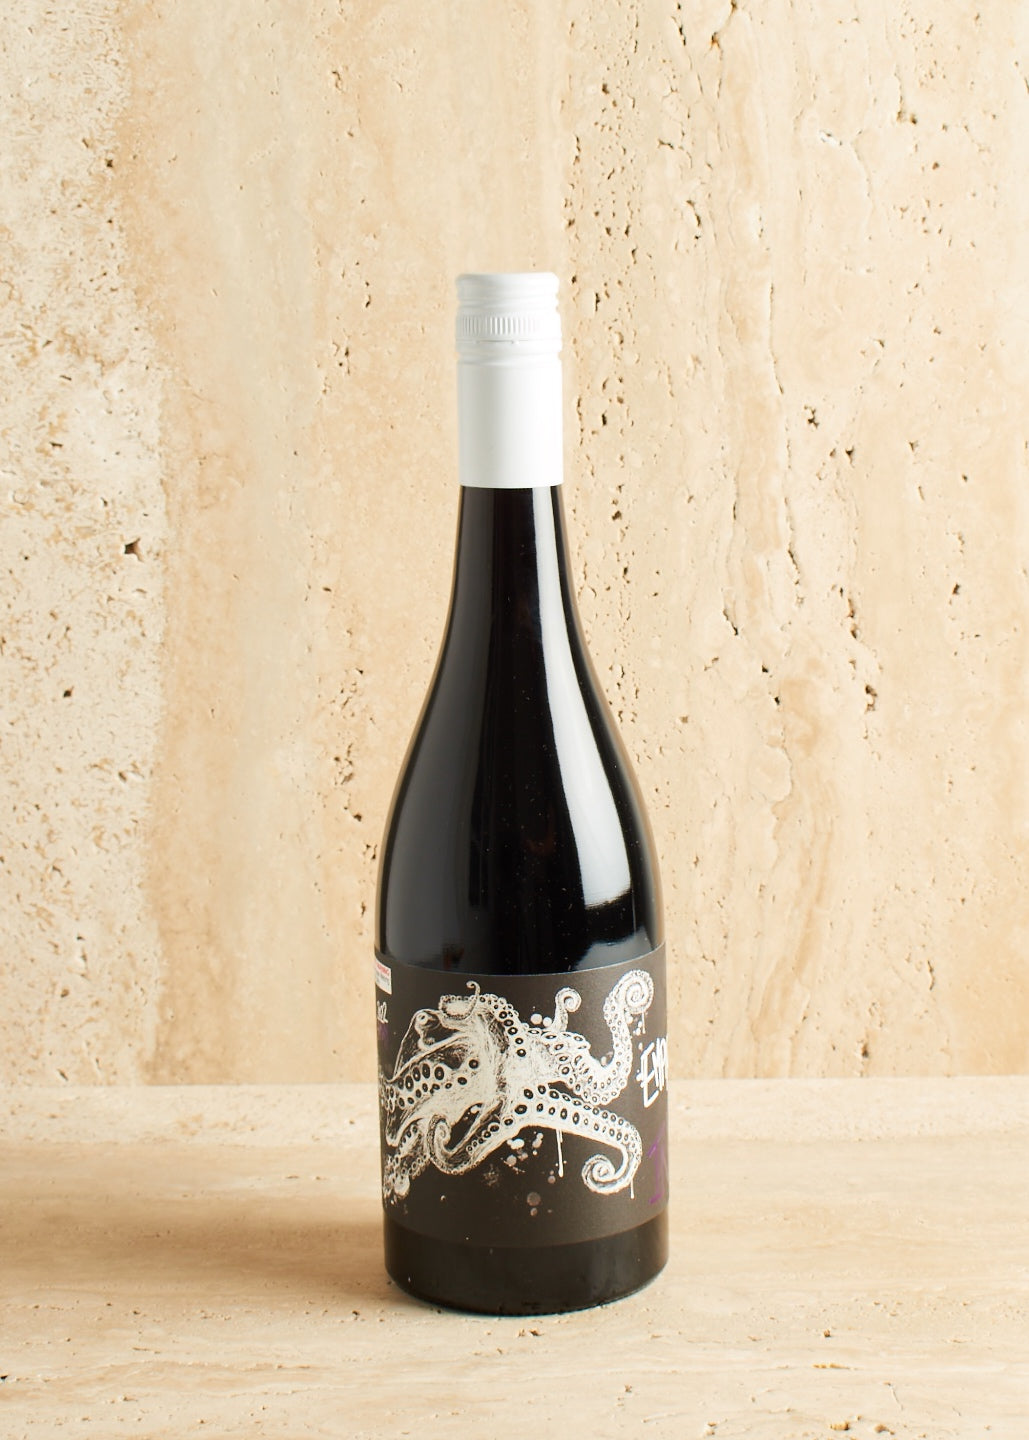 Empire Wines 'Ink' Gamay